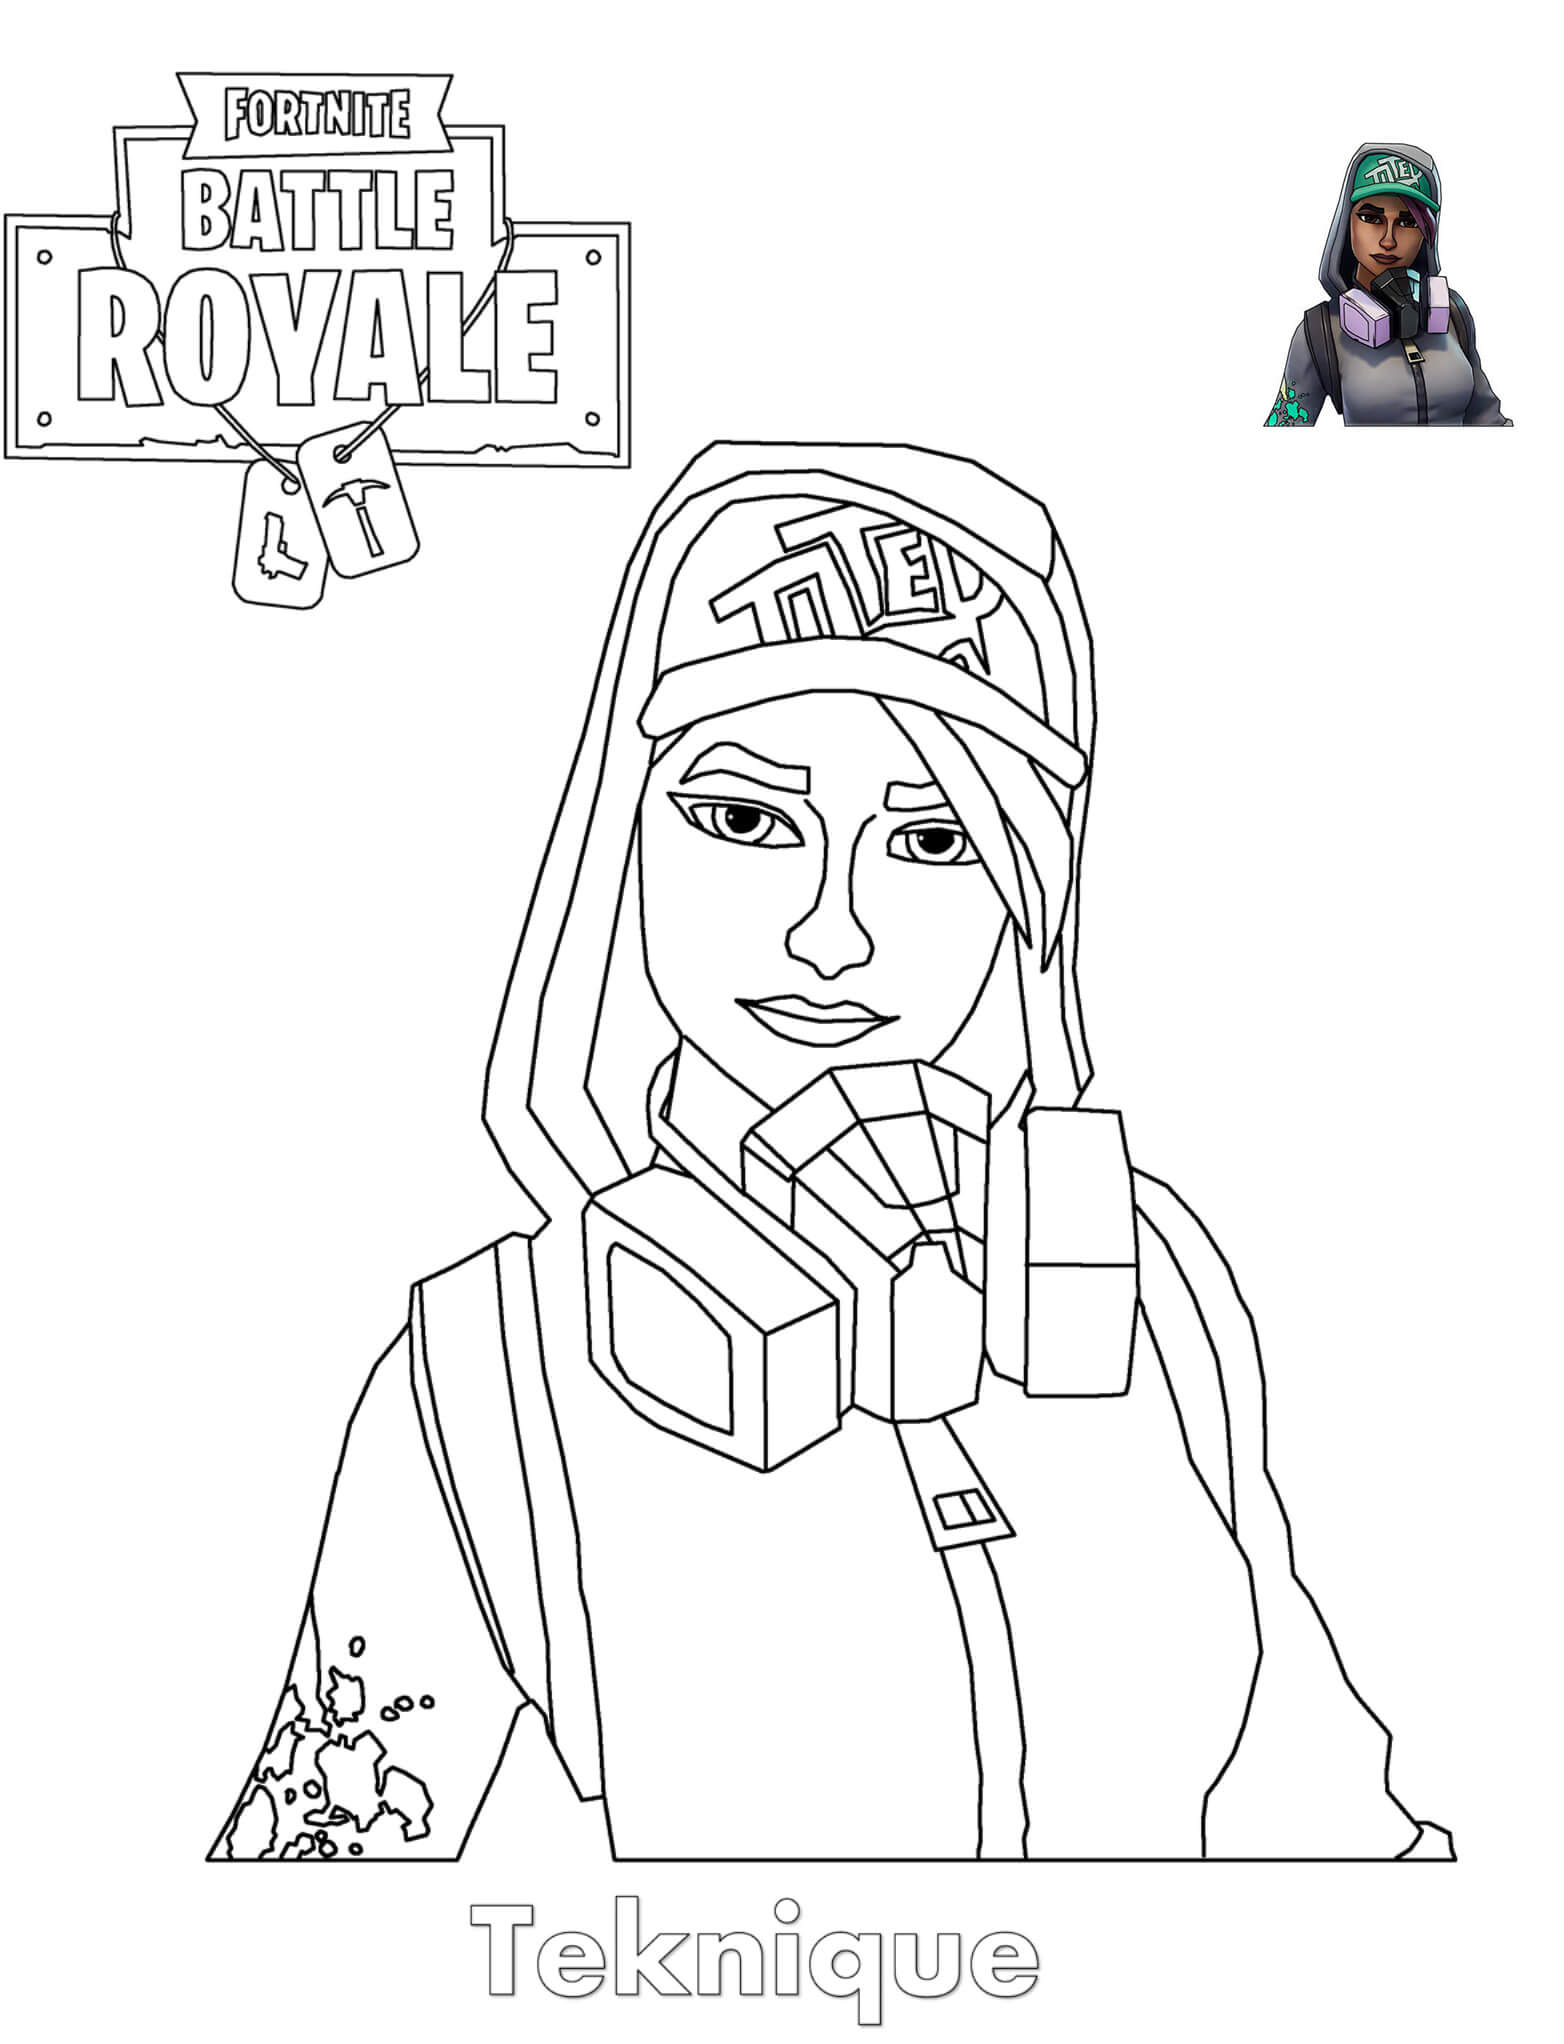 Teknique Fortnite Girl Coloring Page